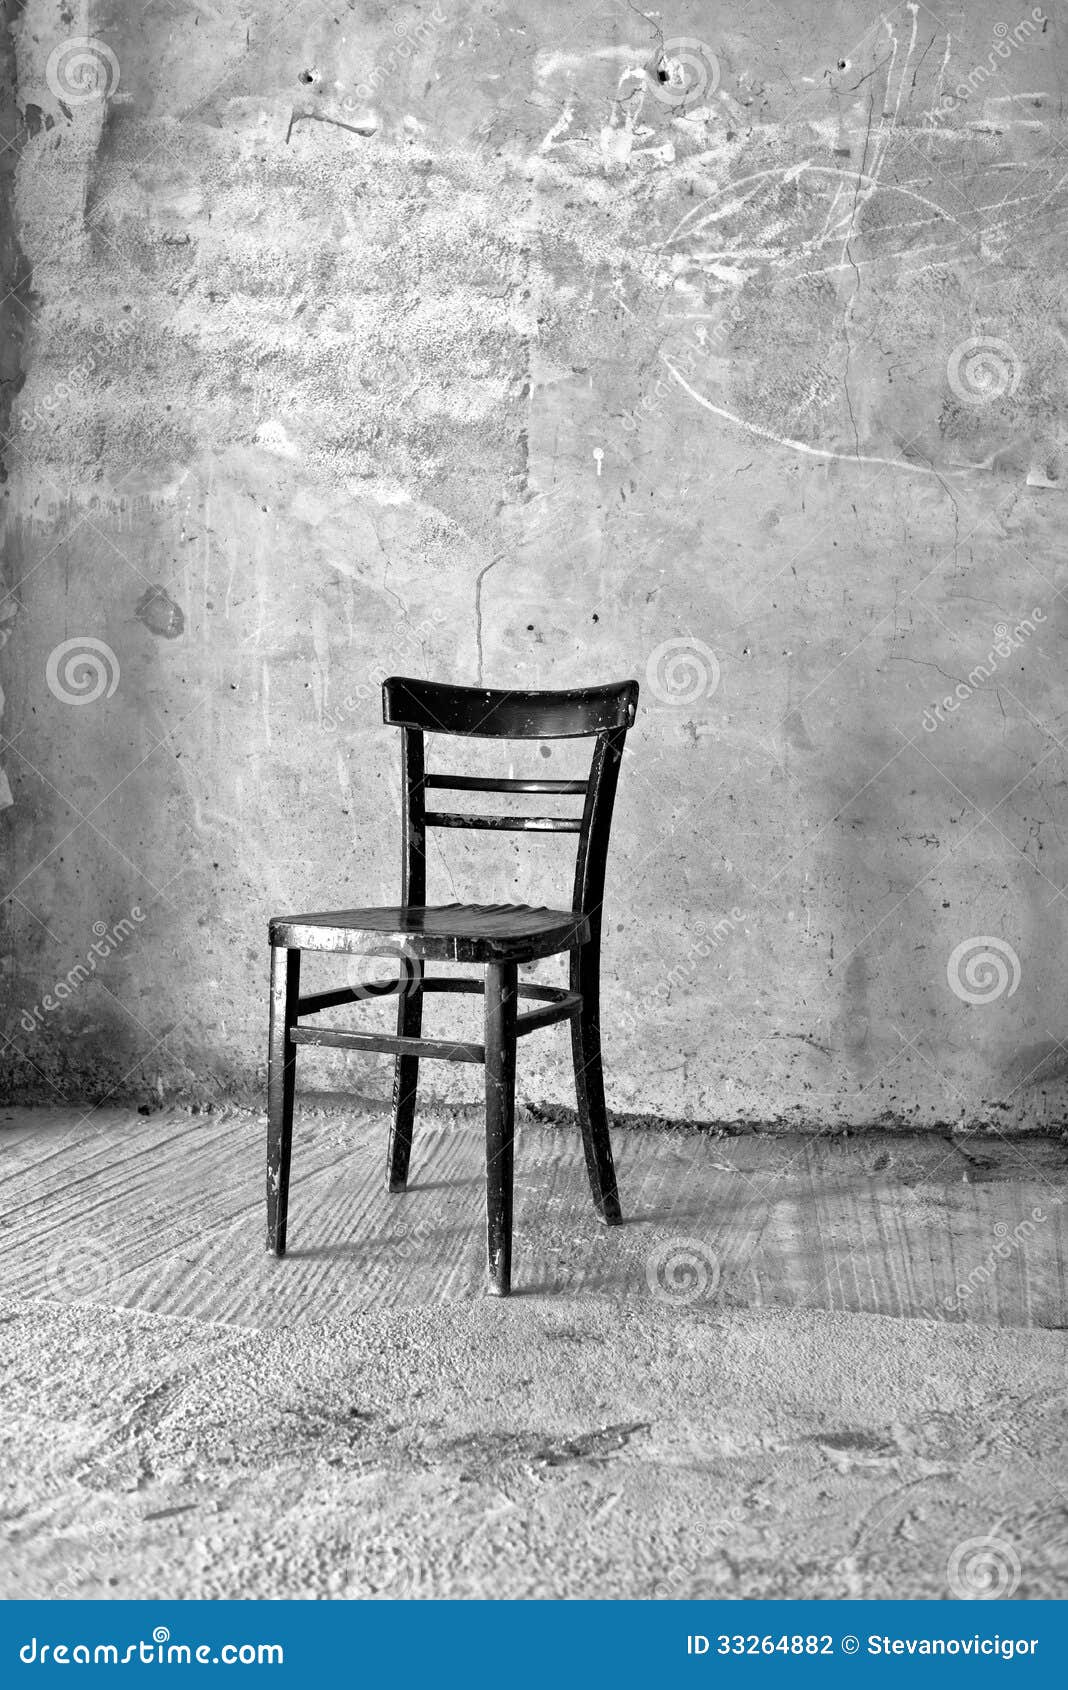 Old vintage chair stock photo. Image of grunge, junk ...